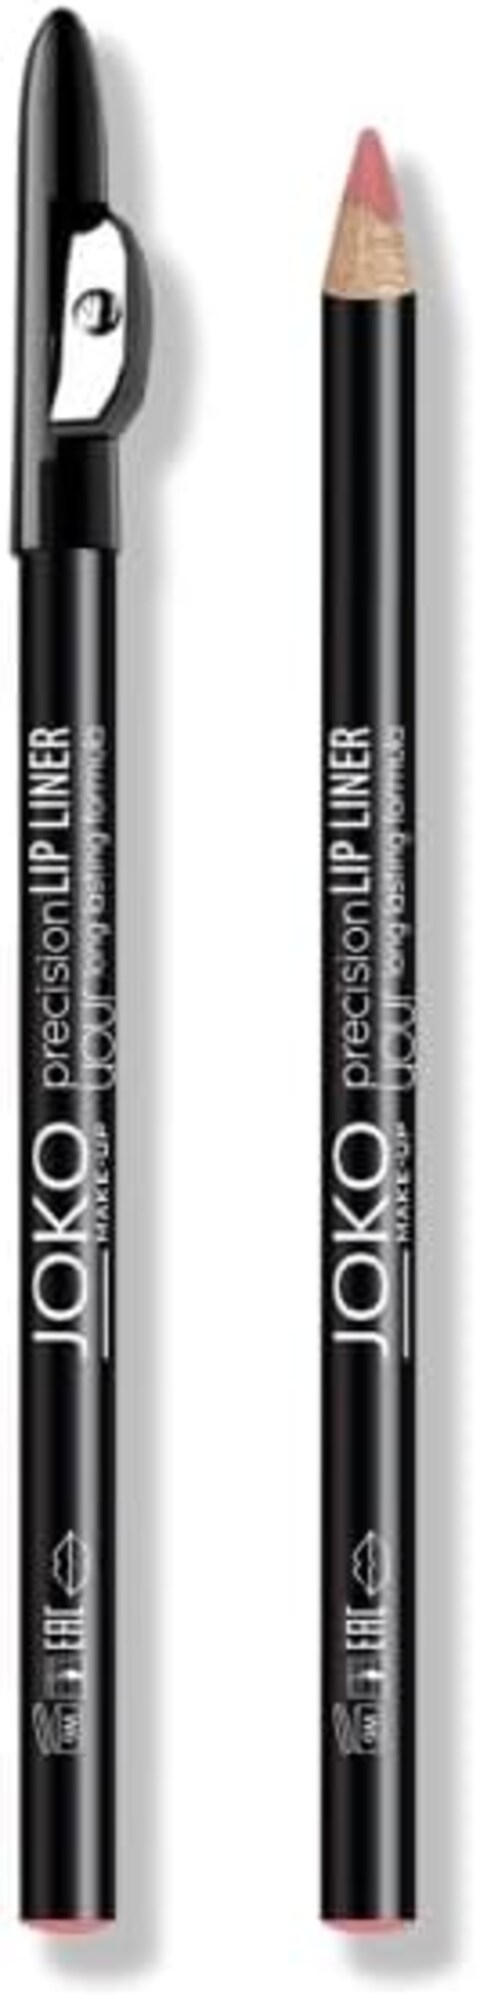 Joko Precision Lip Liner #44 - Long-Lasting Formula For Defined Lips, Enhance Lip Contours With Precision, Smudge-Proof &amp; Waterproof